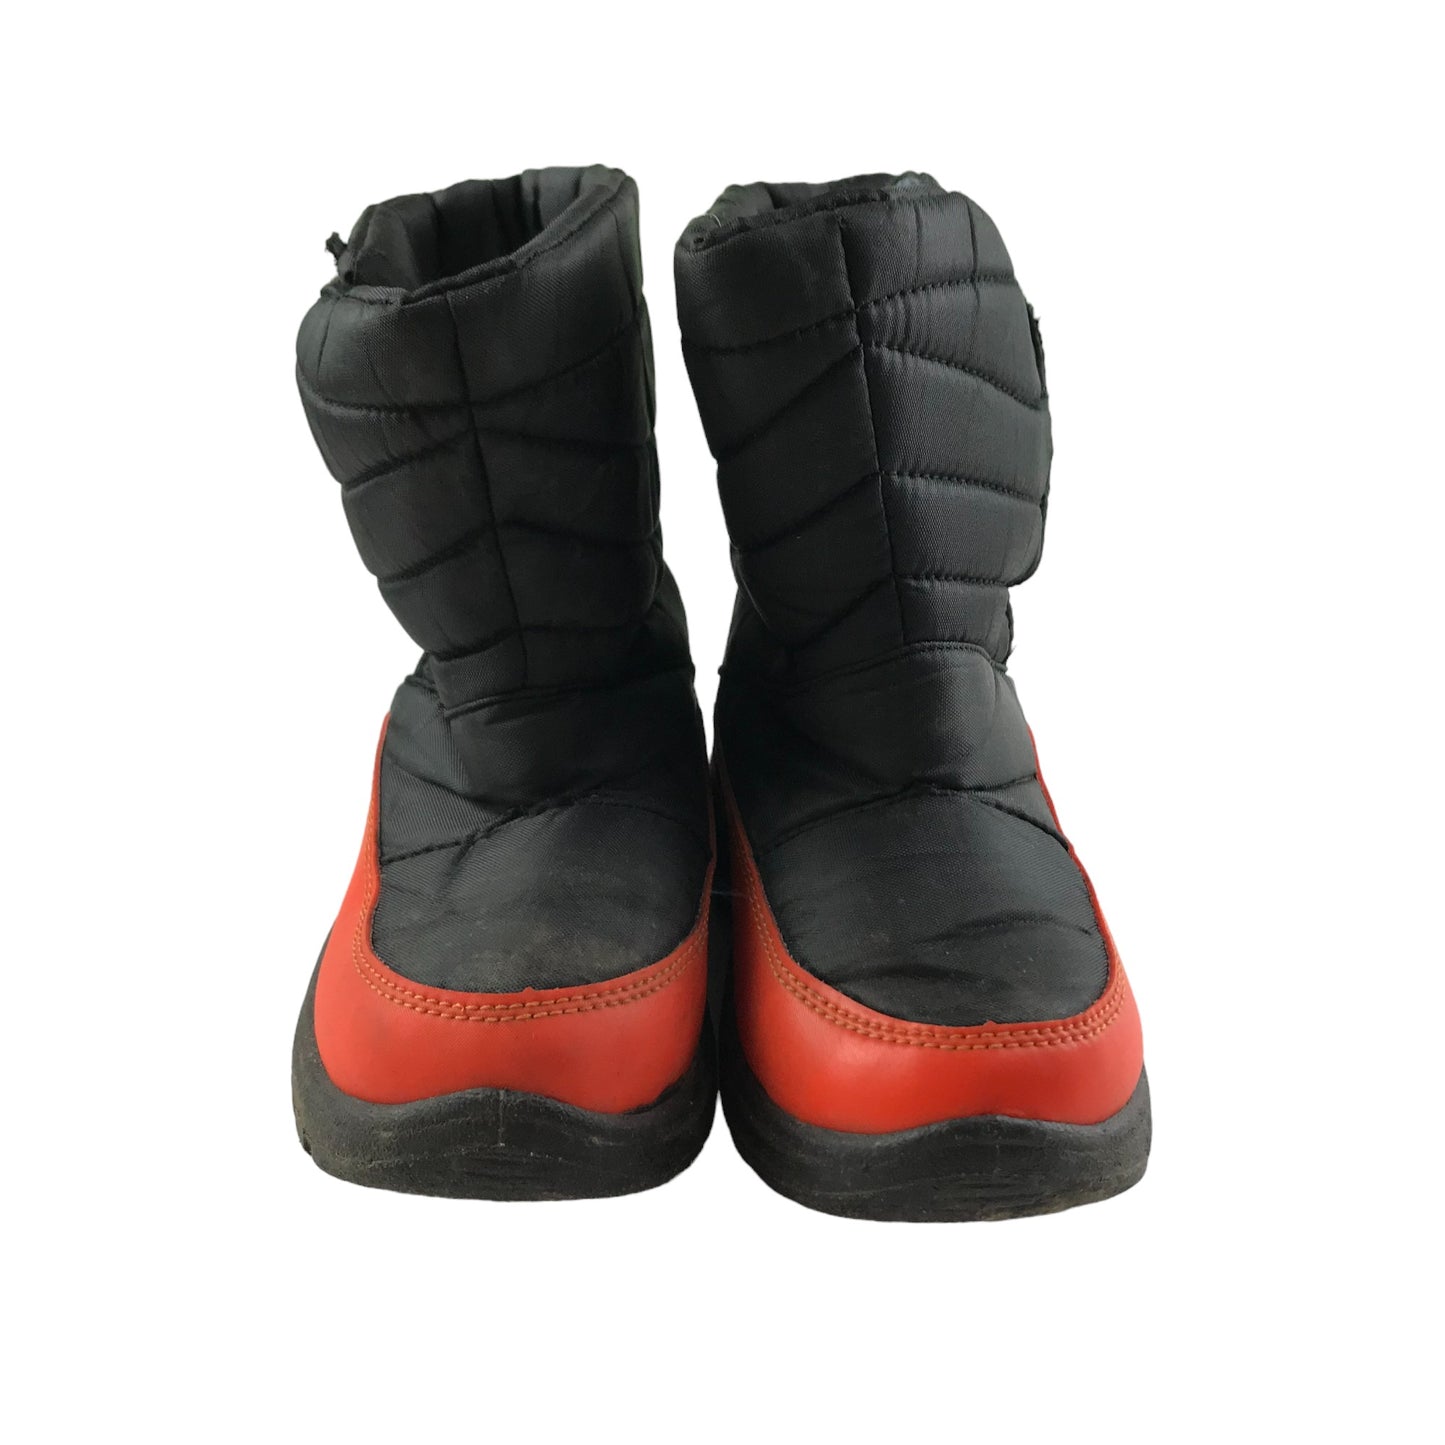 Mountain Warehouse Snow Boots Shoe Size 10 Junior Black and Orangey Red High Tops